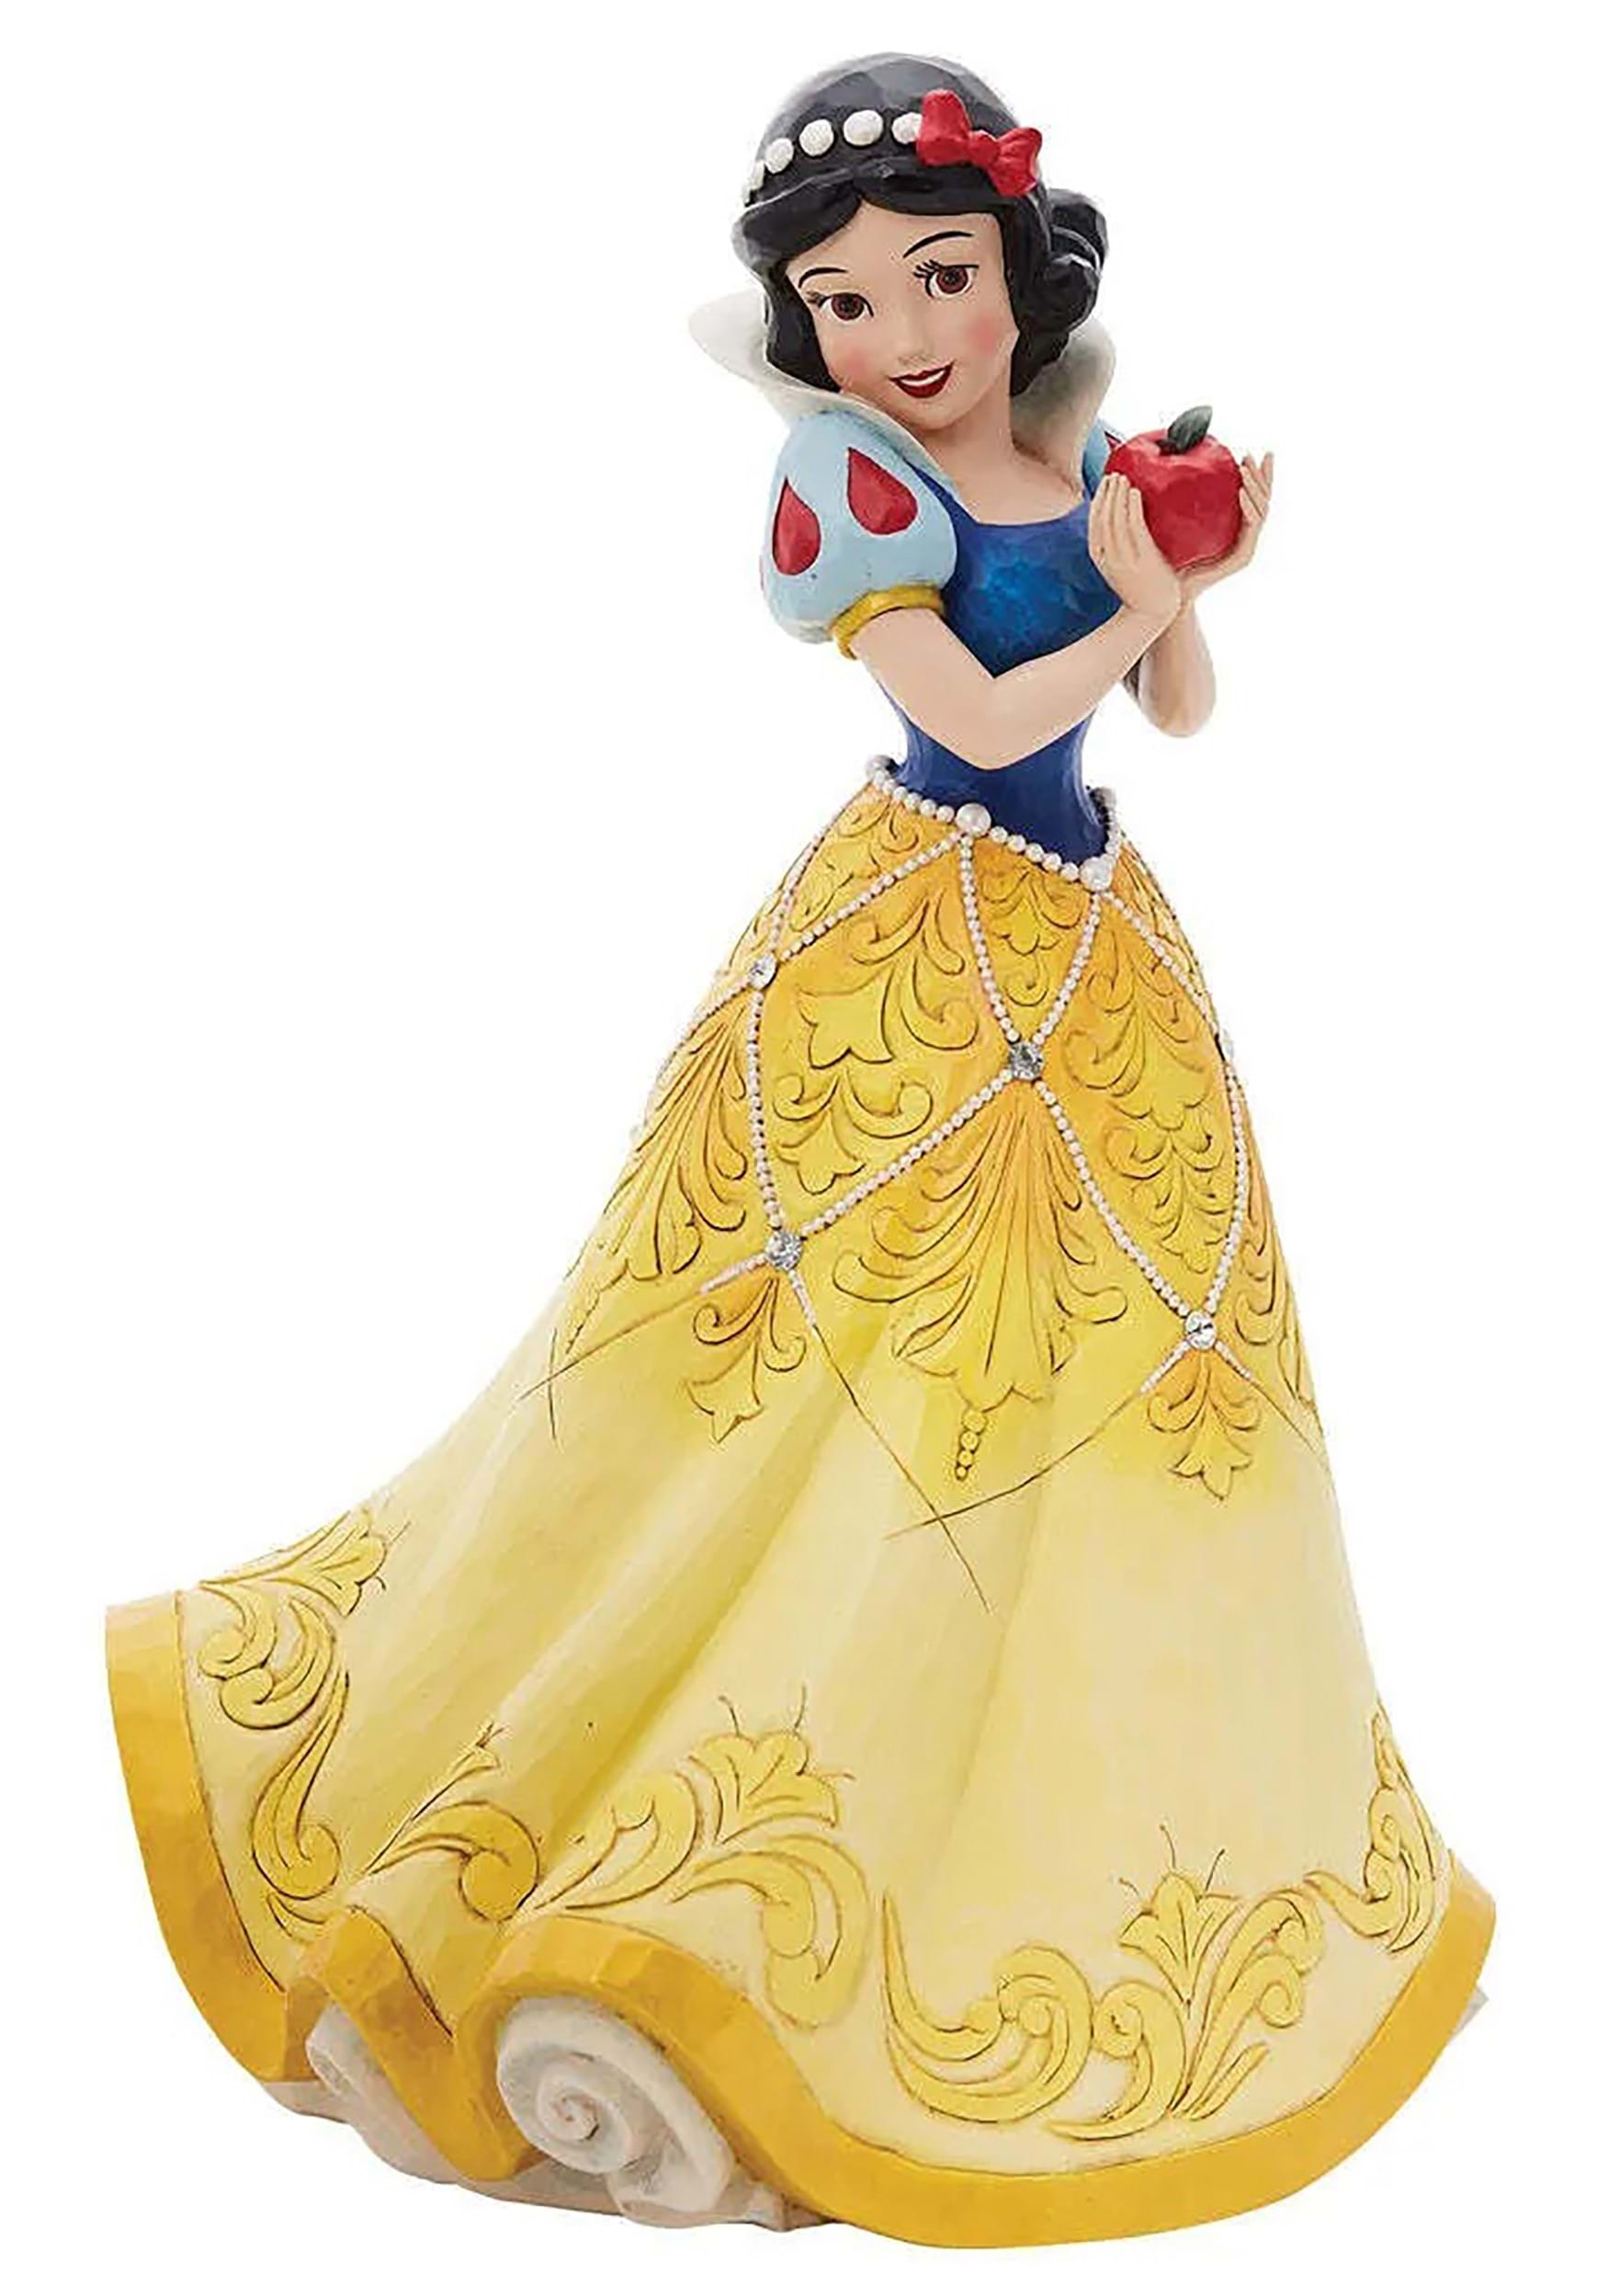 https://images.fun.com/products/82042/1-1/jim-shore-snow-white-deluxe-statue.jpg